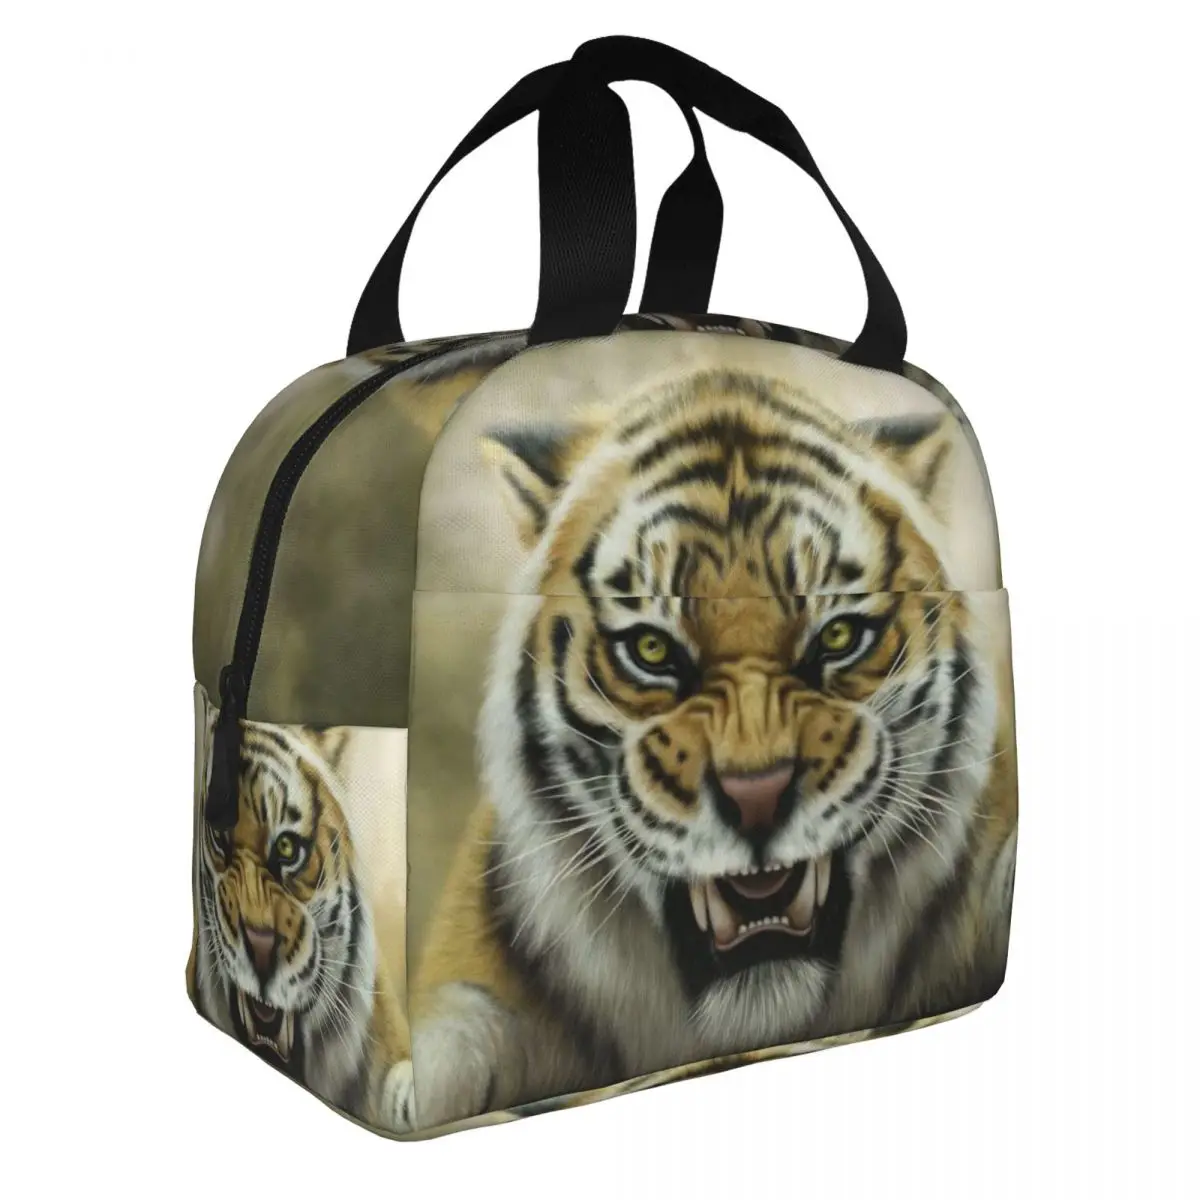 Tiger Lunch Bento Bags Portable Aluminum Foil thickened Thermal Cloth Lunch Bag for Women Men Boy